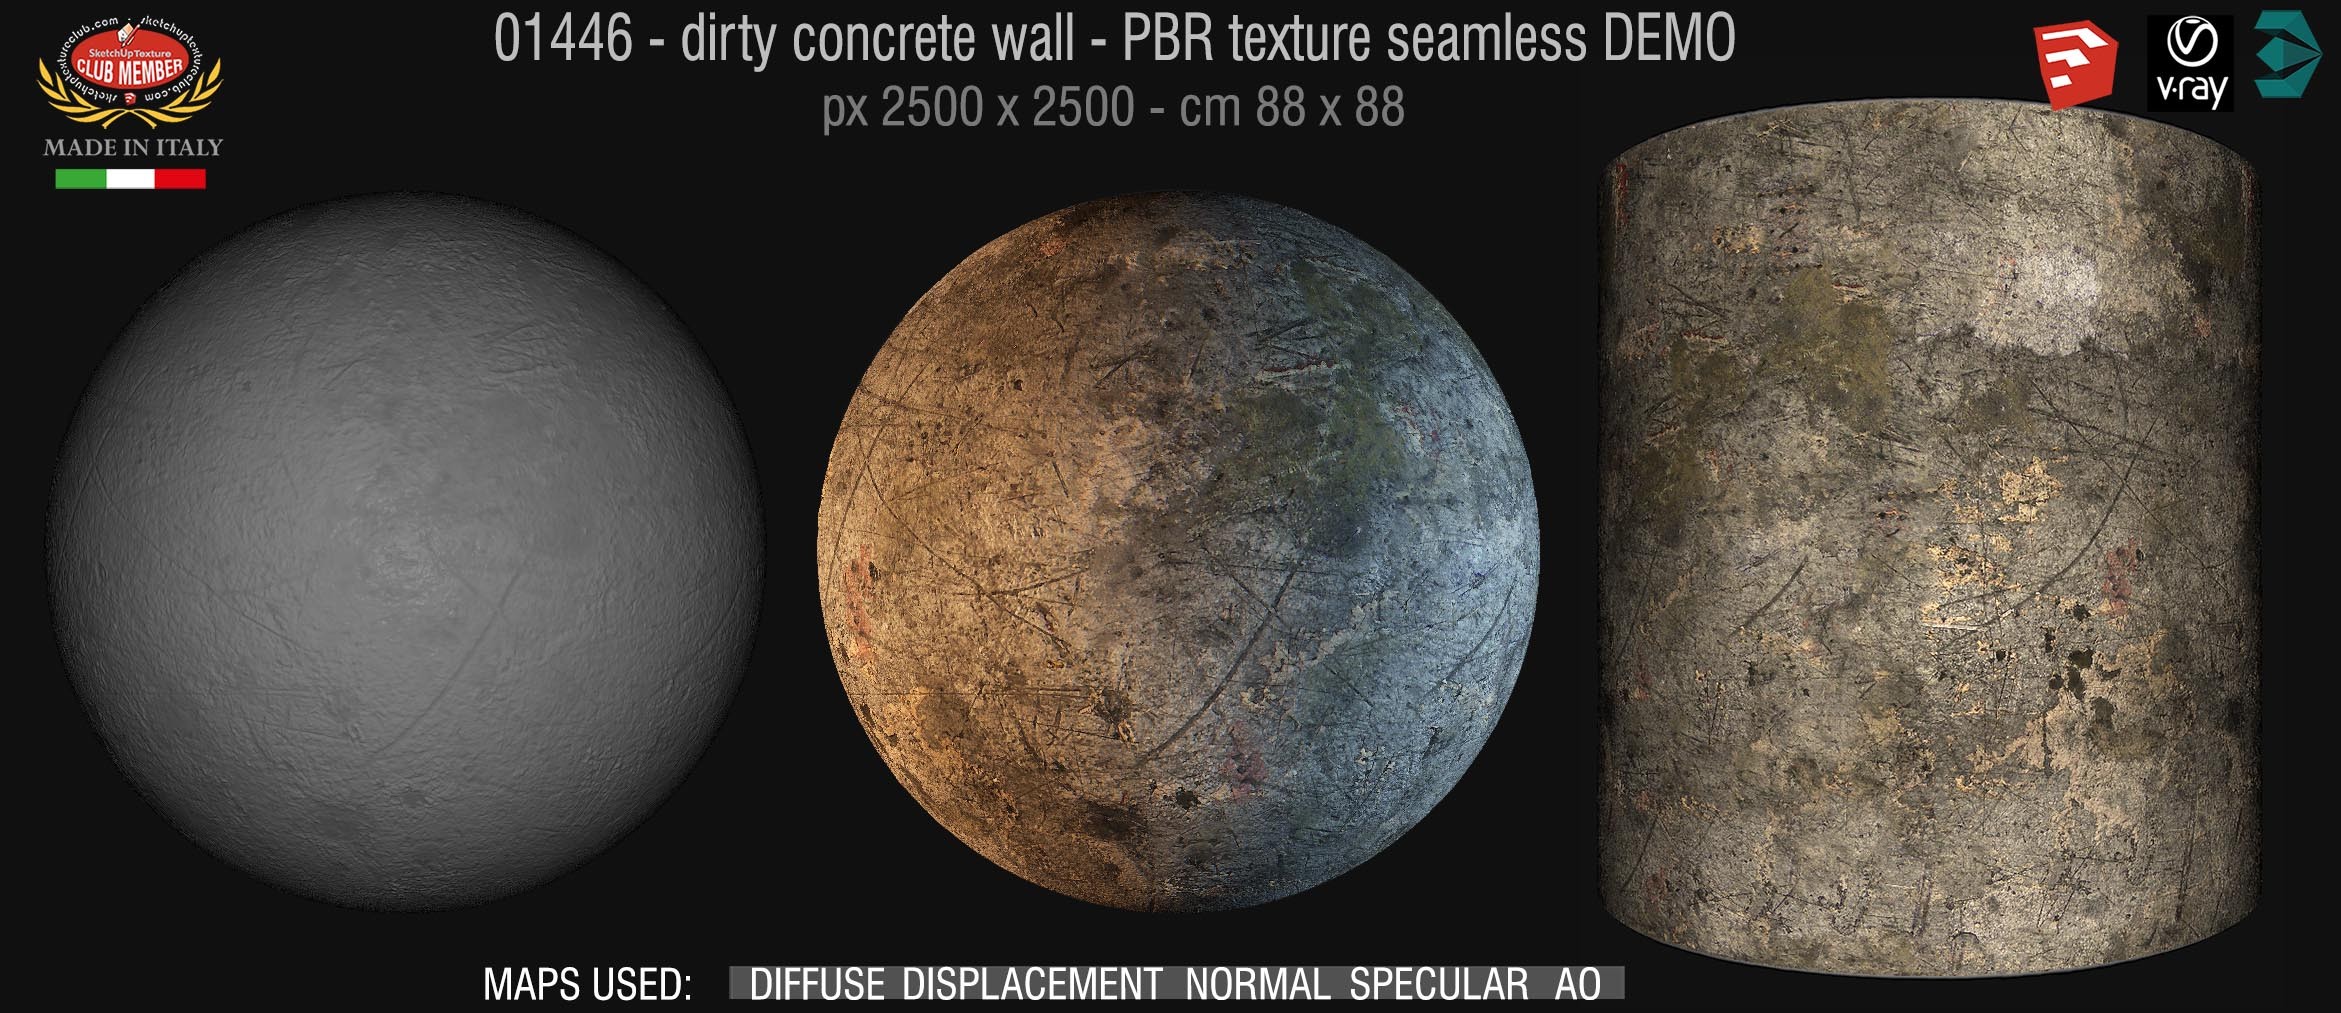 01446 Concrete bare dirty wall PBR texture seamless DEMO